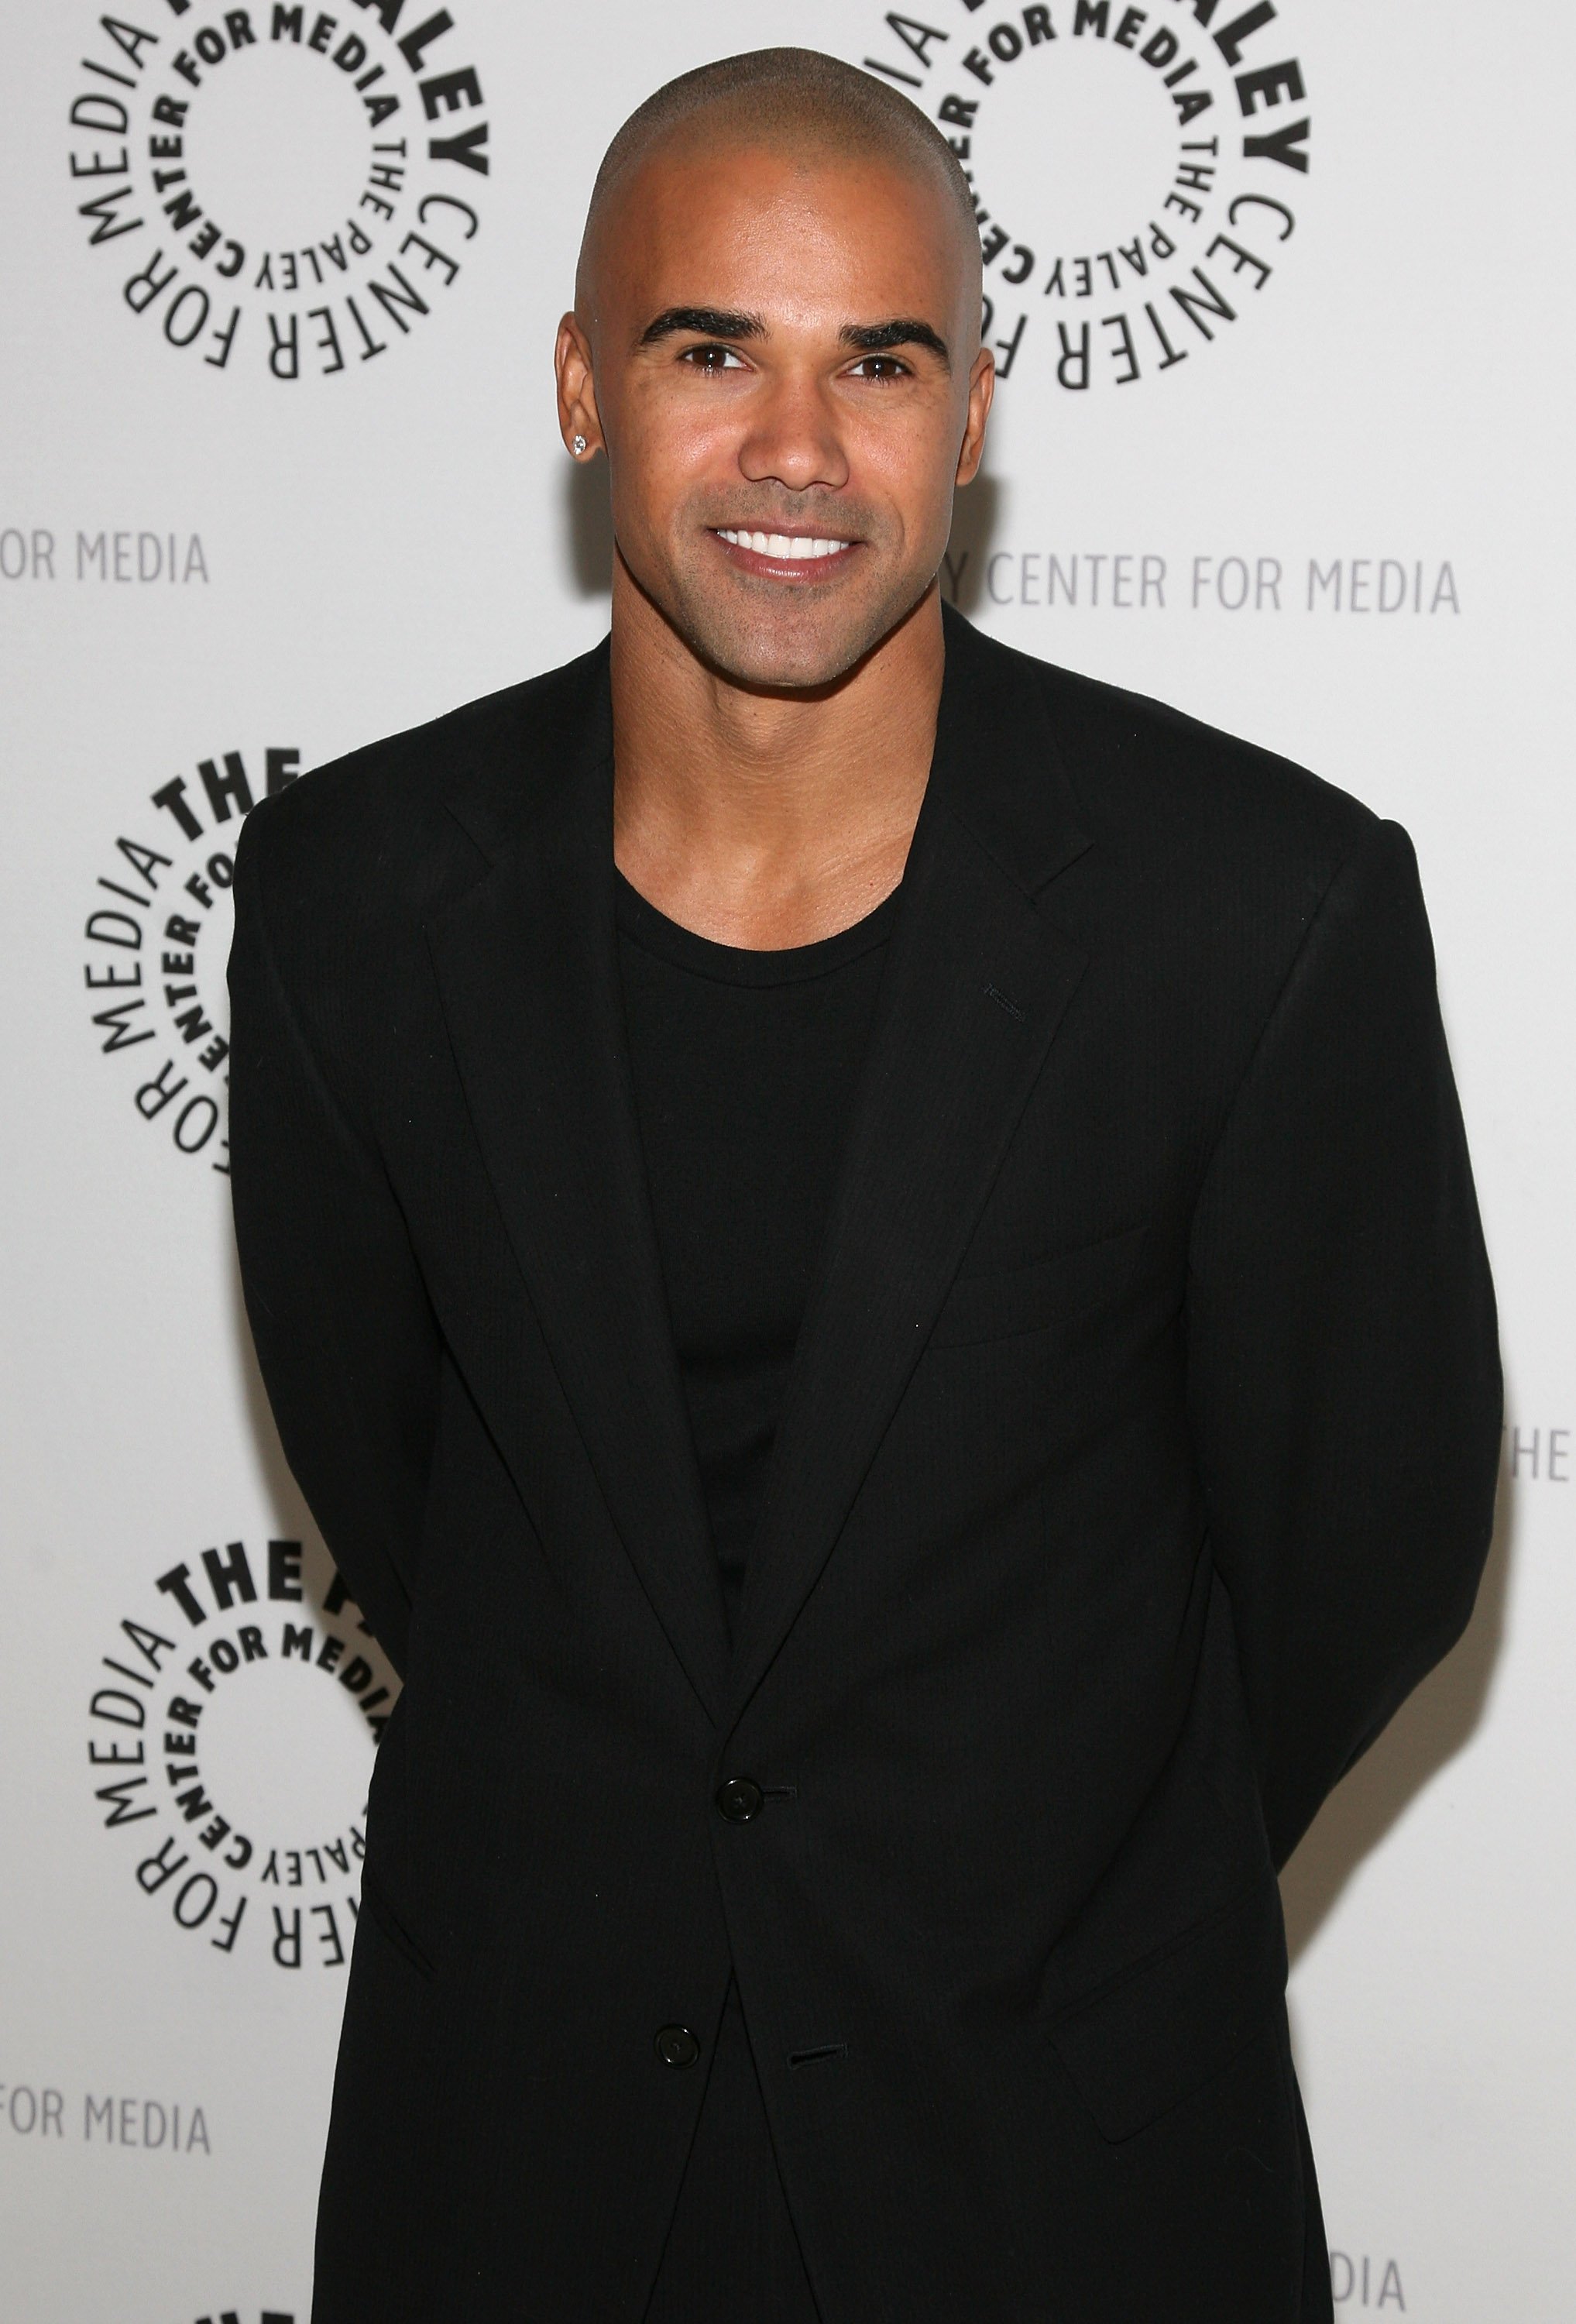 Shemar Moore attends The Paley Center Presentation for "Inside Criminal Minds" at The Paley Center for Media on November 17, 2008, in Beverly Hills, California. | Source: Getty Images